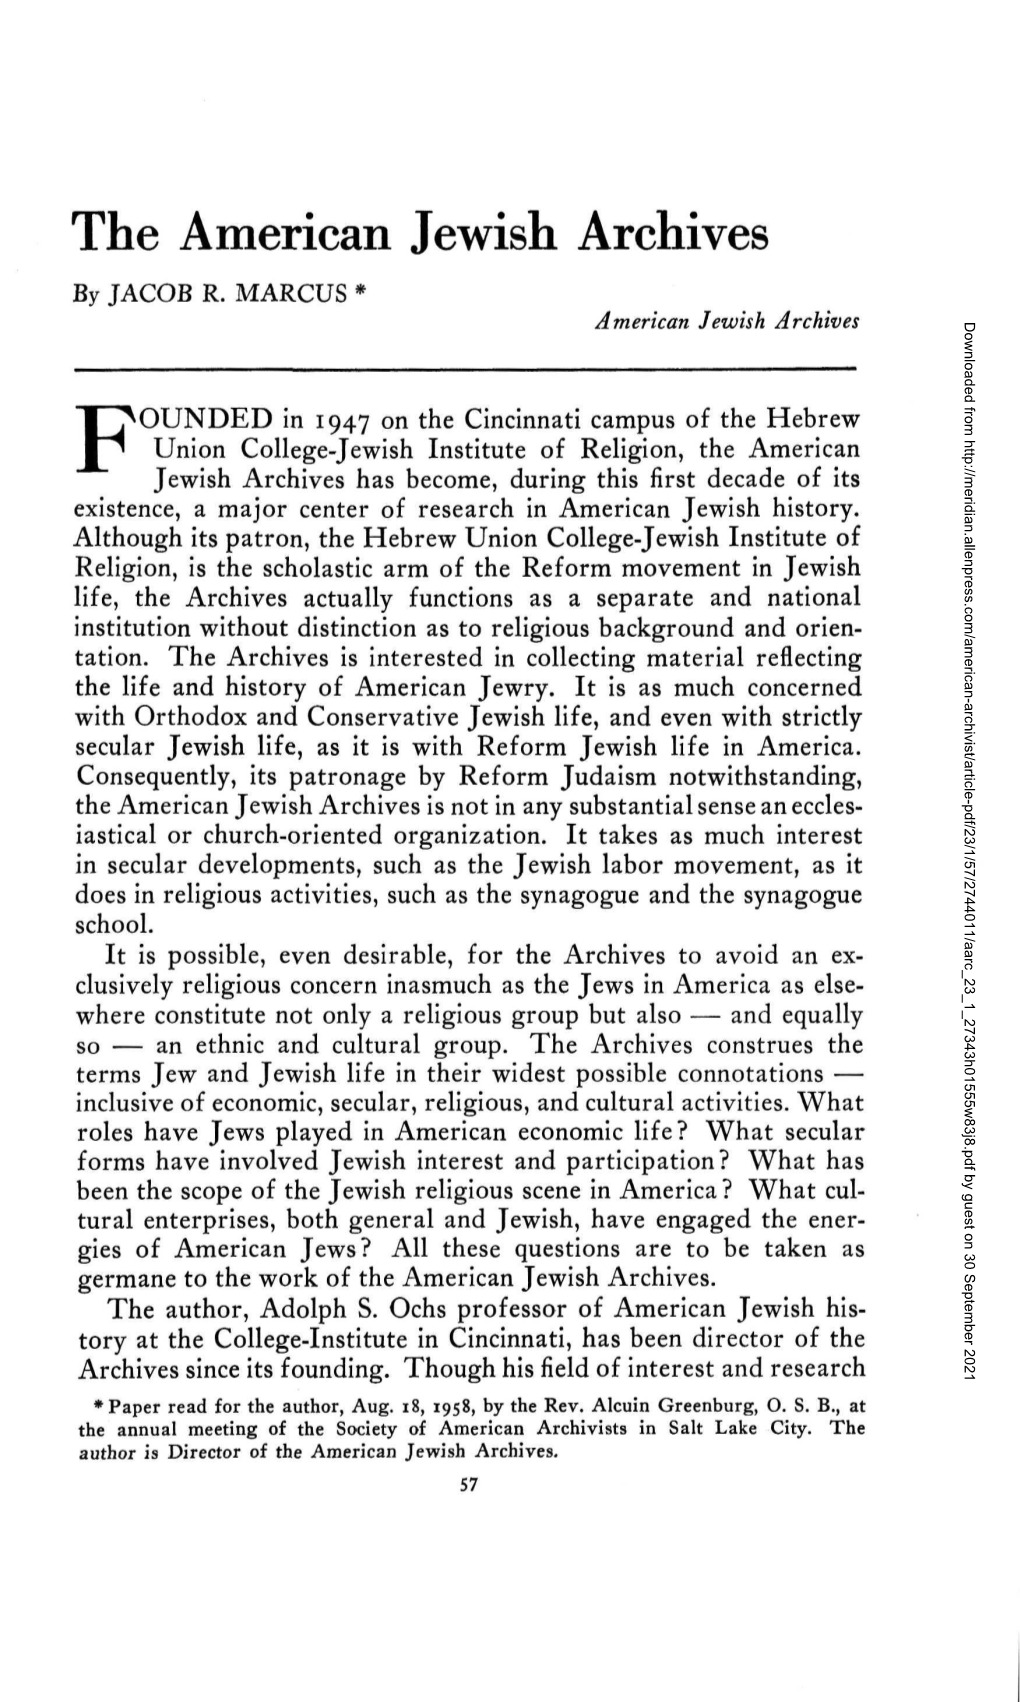 The American Jewish Archives by JACOB R